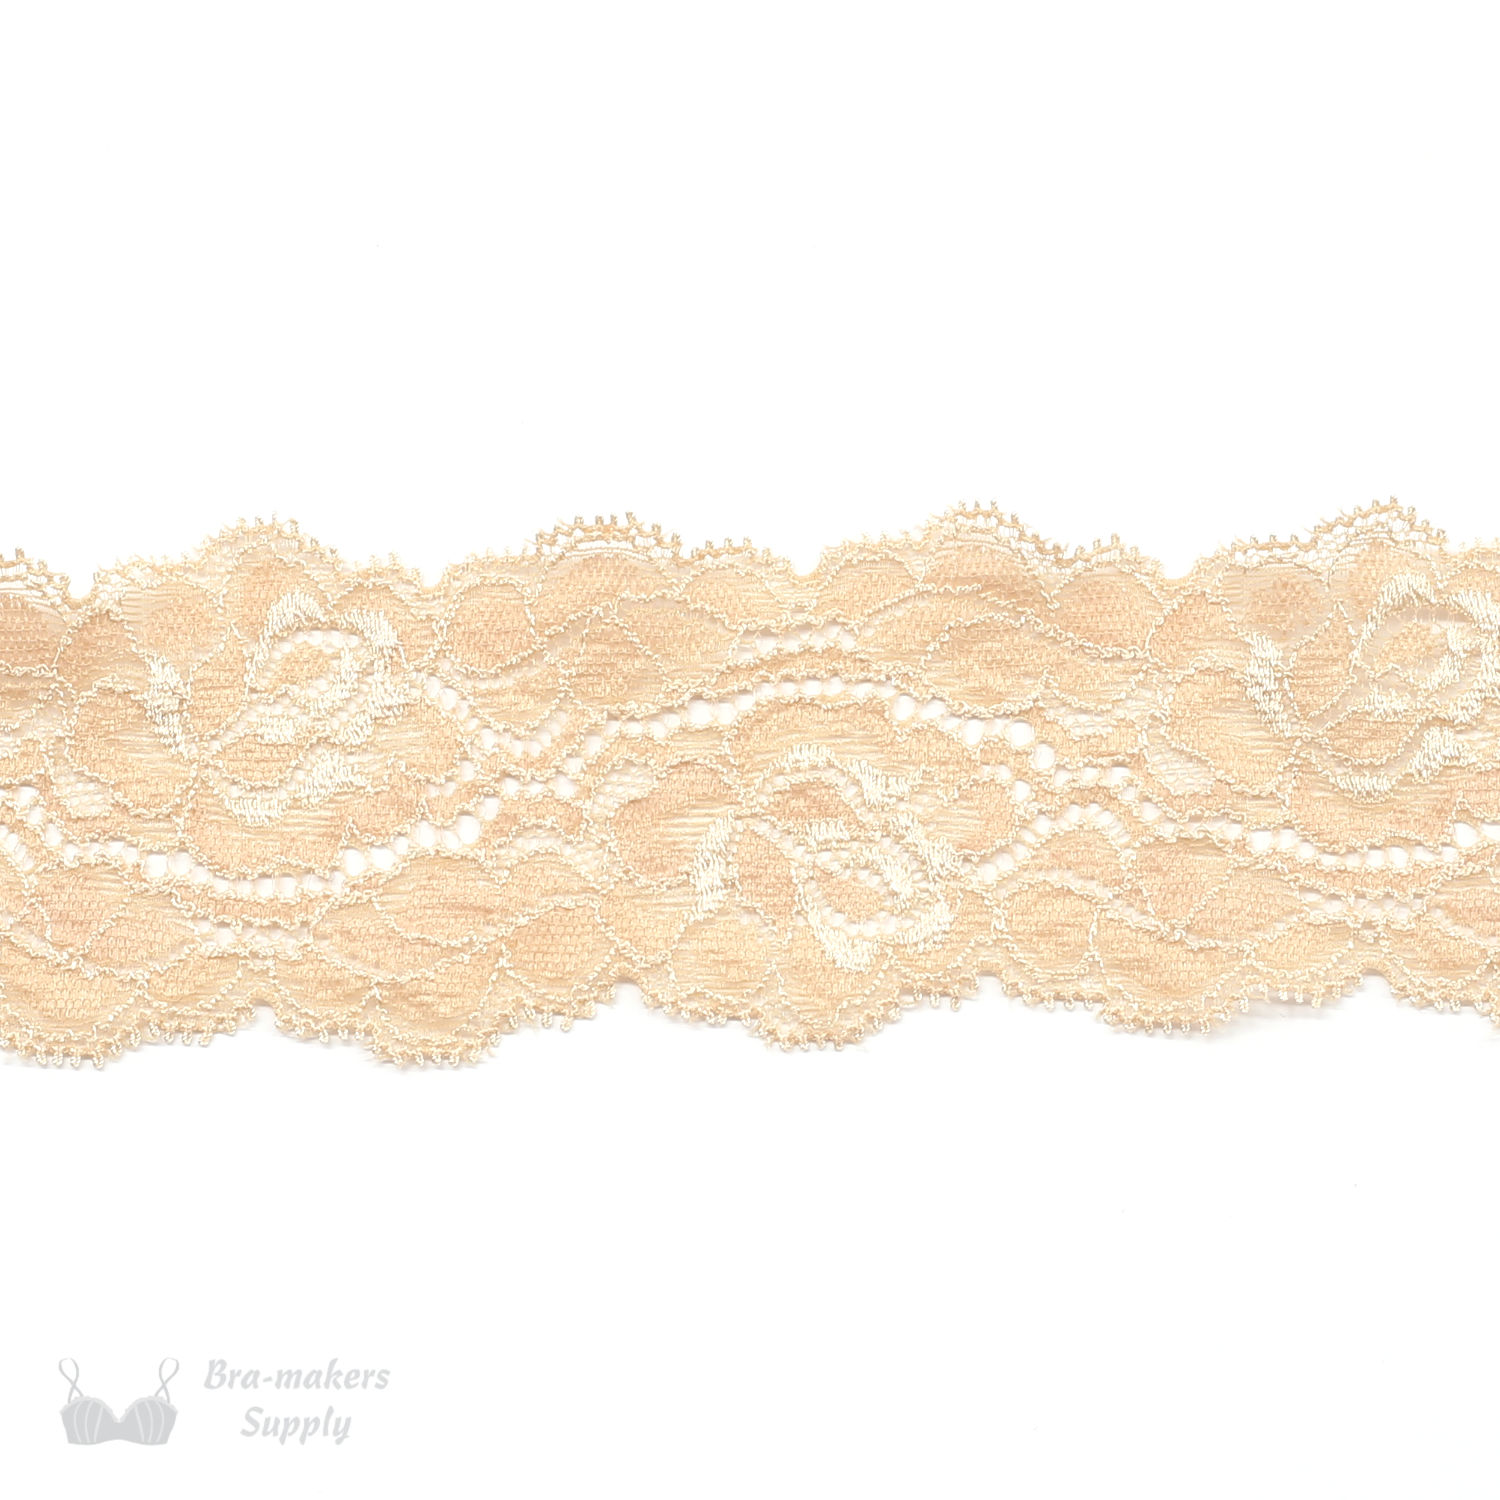 Two Inch Dark Beige Floral Galloon Stretch Lace - Bra-Makers Supply